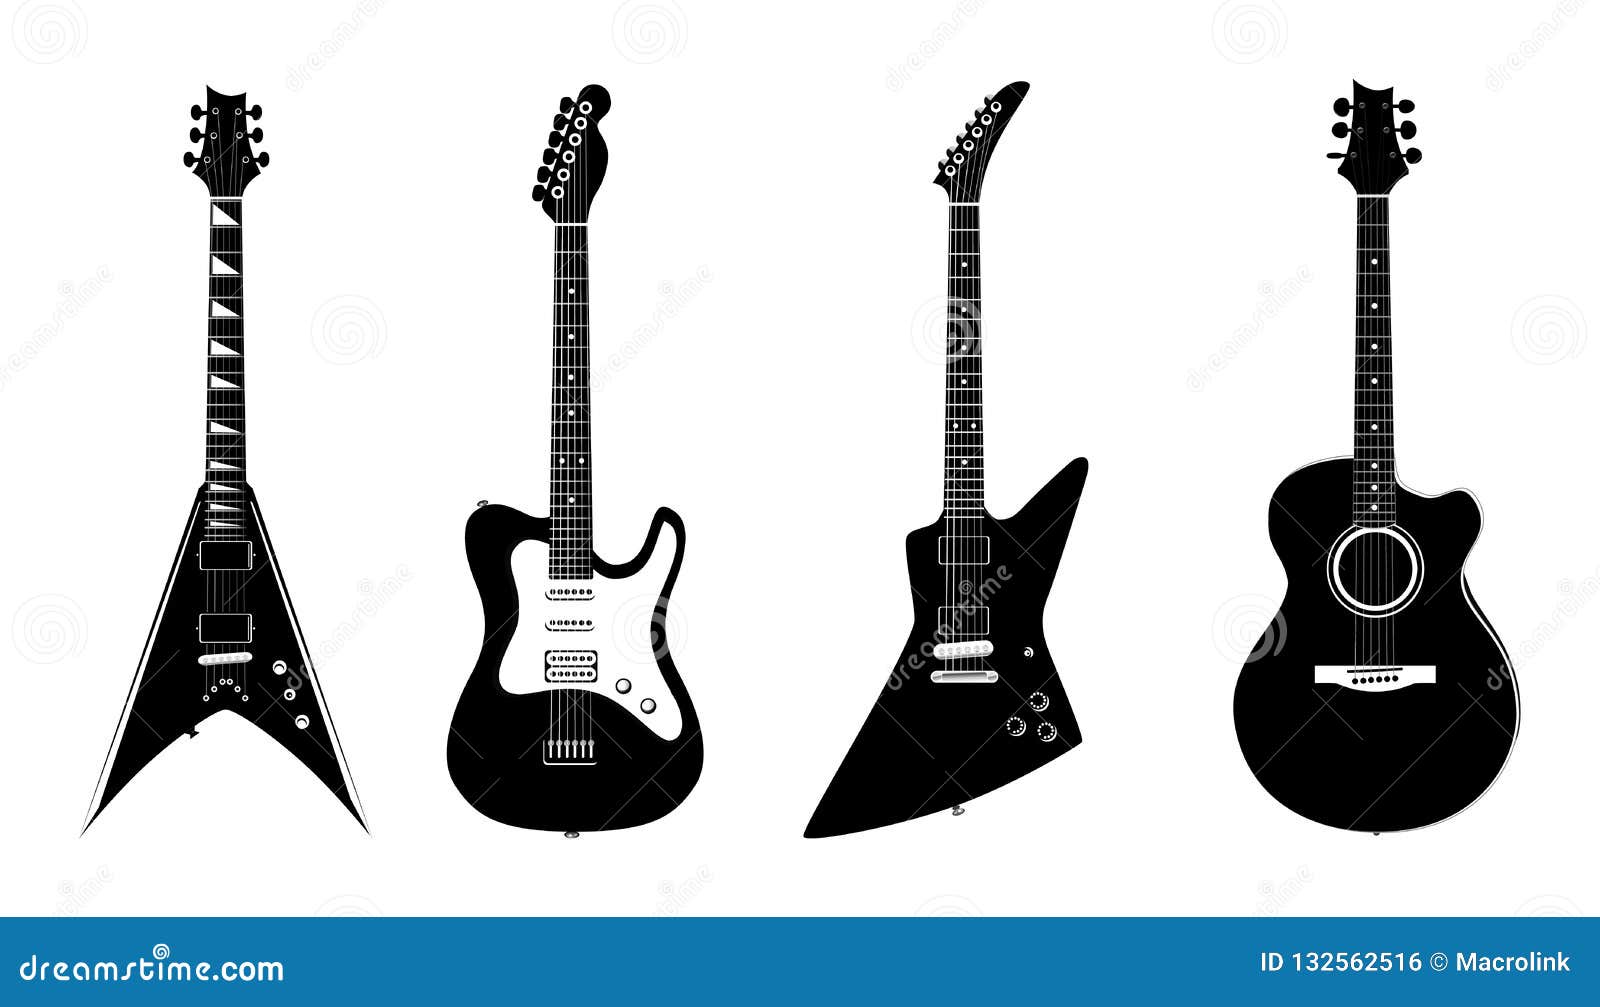  silhouettes of acoustic guitar and electric guitars black color  on white.